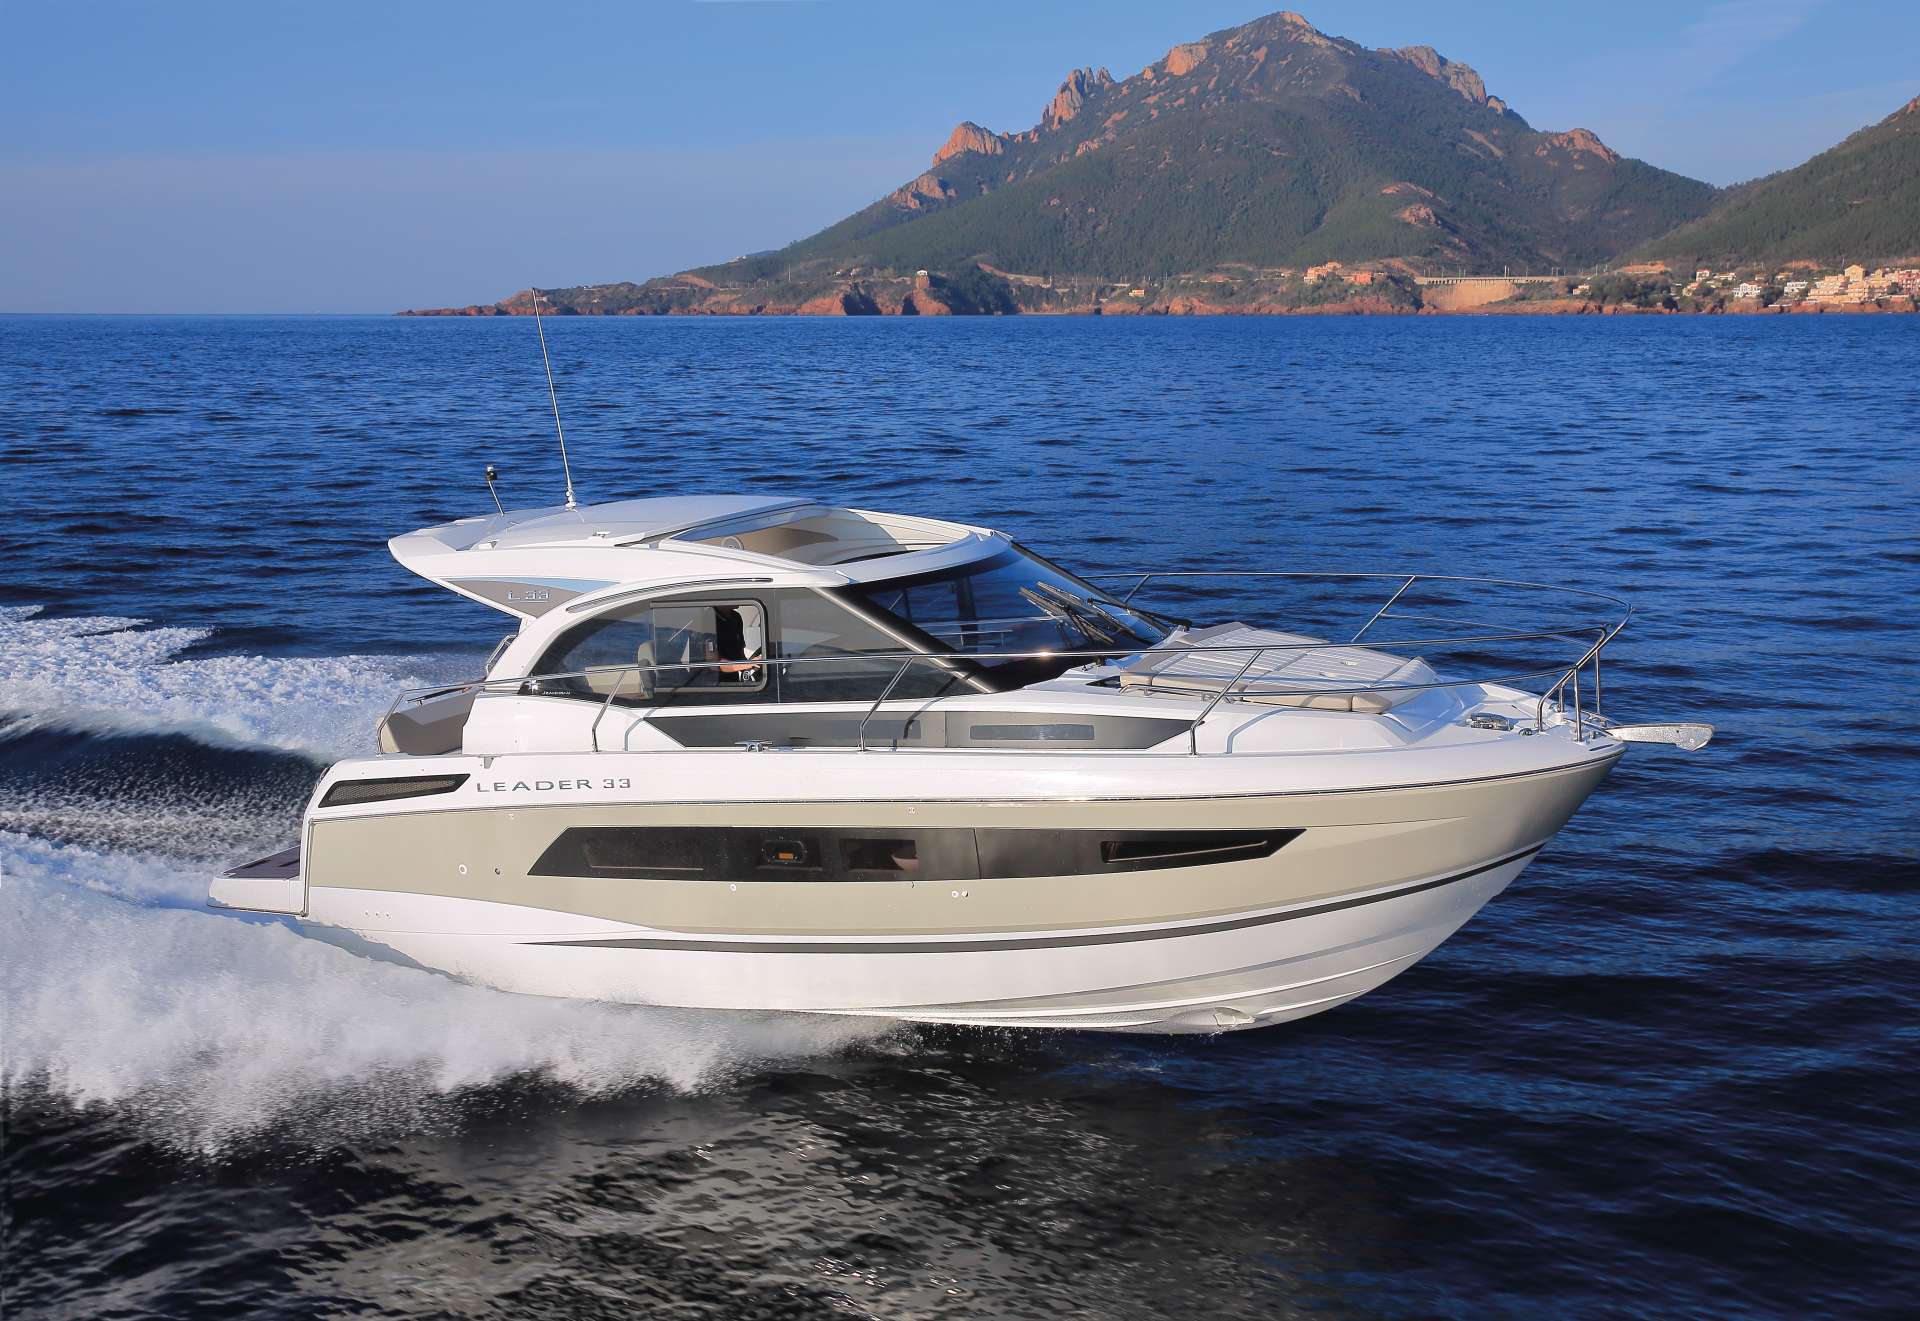 Leader 33 - Yacht Charter Antibes & Boat hire in France French Riviera Antibes 1